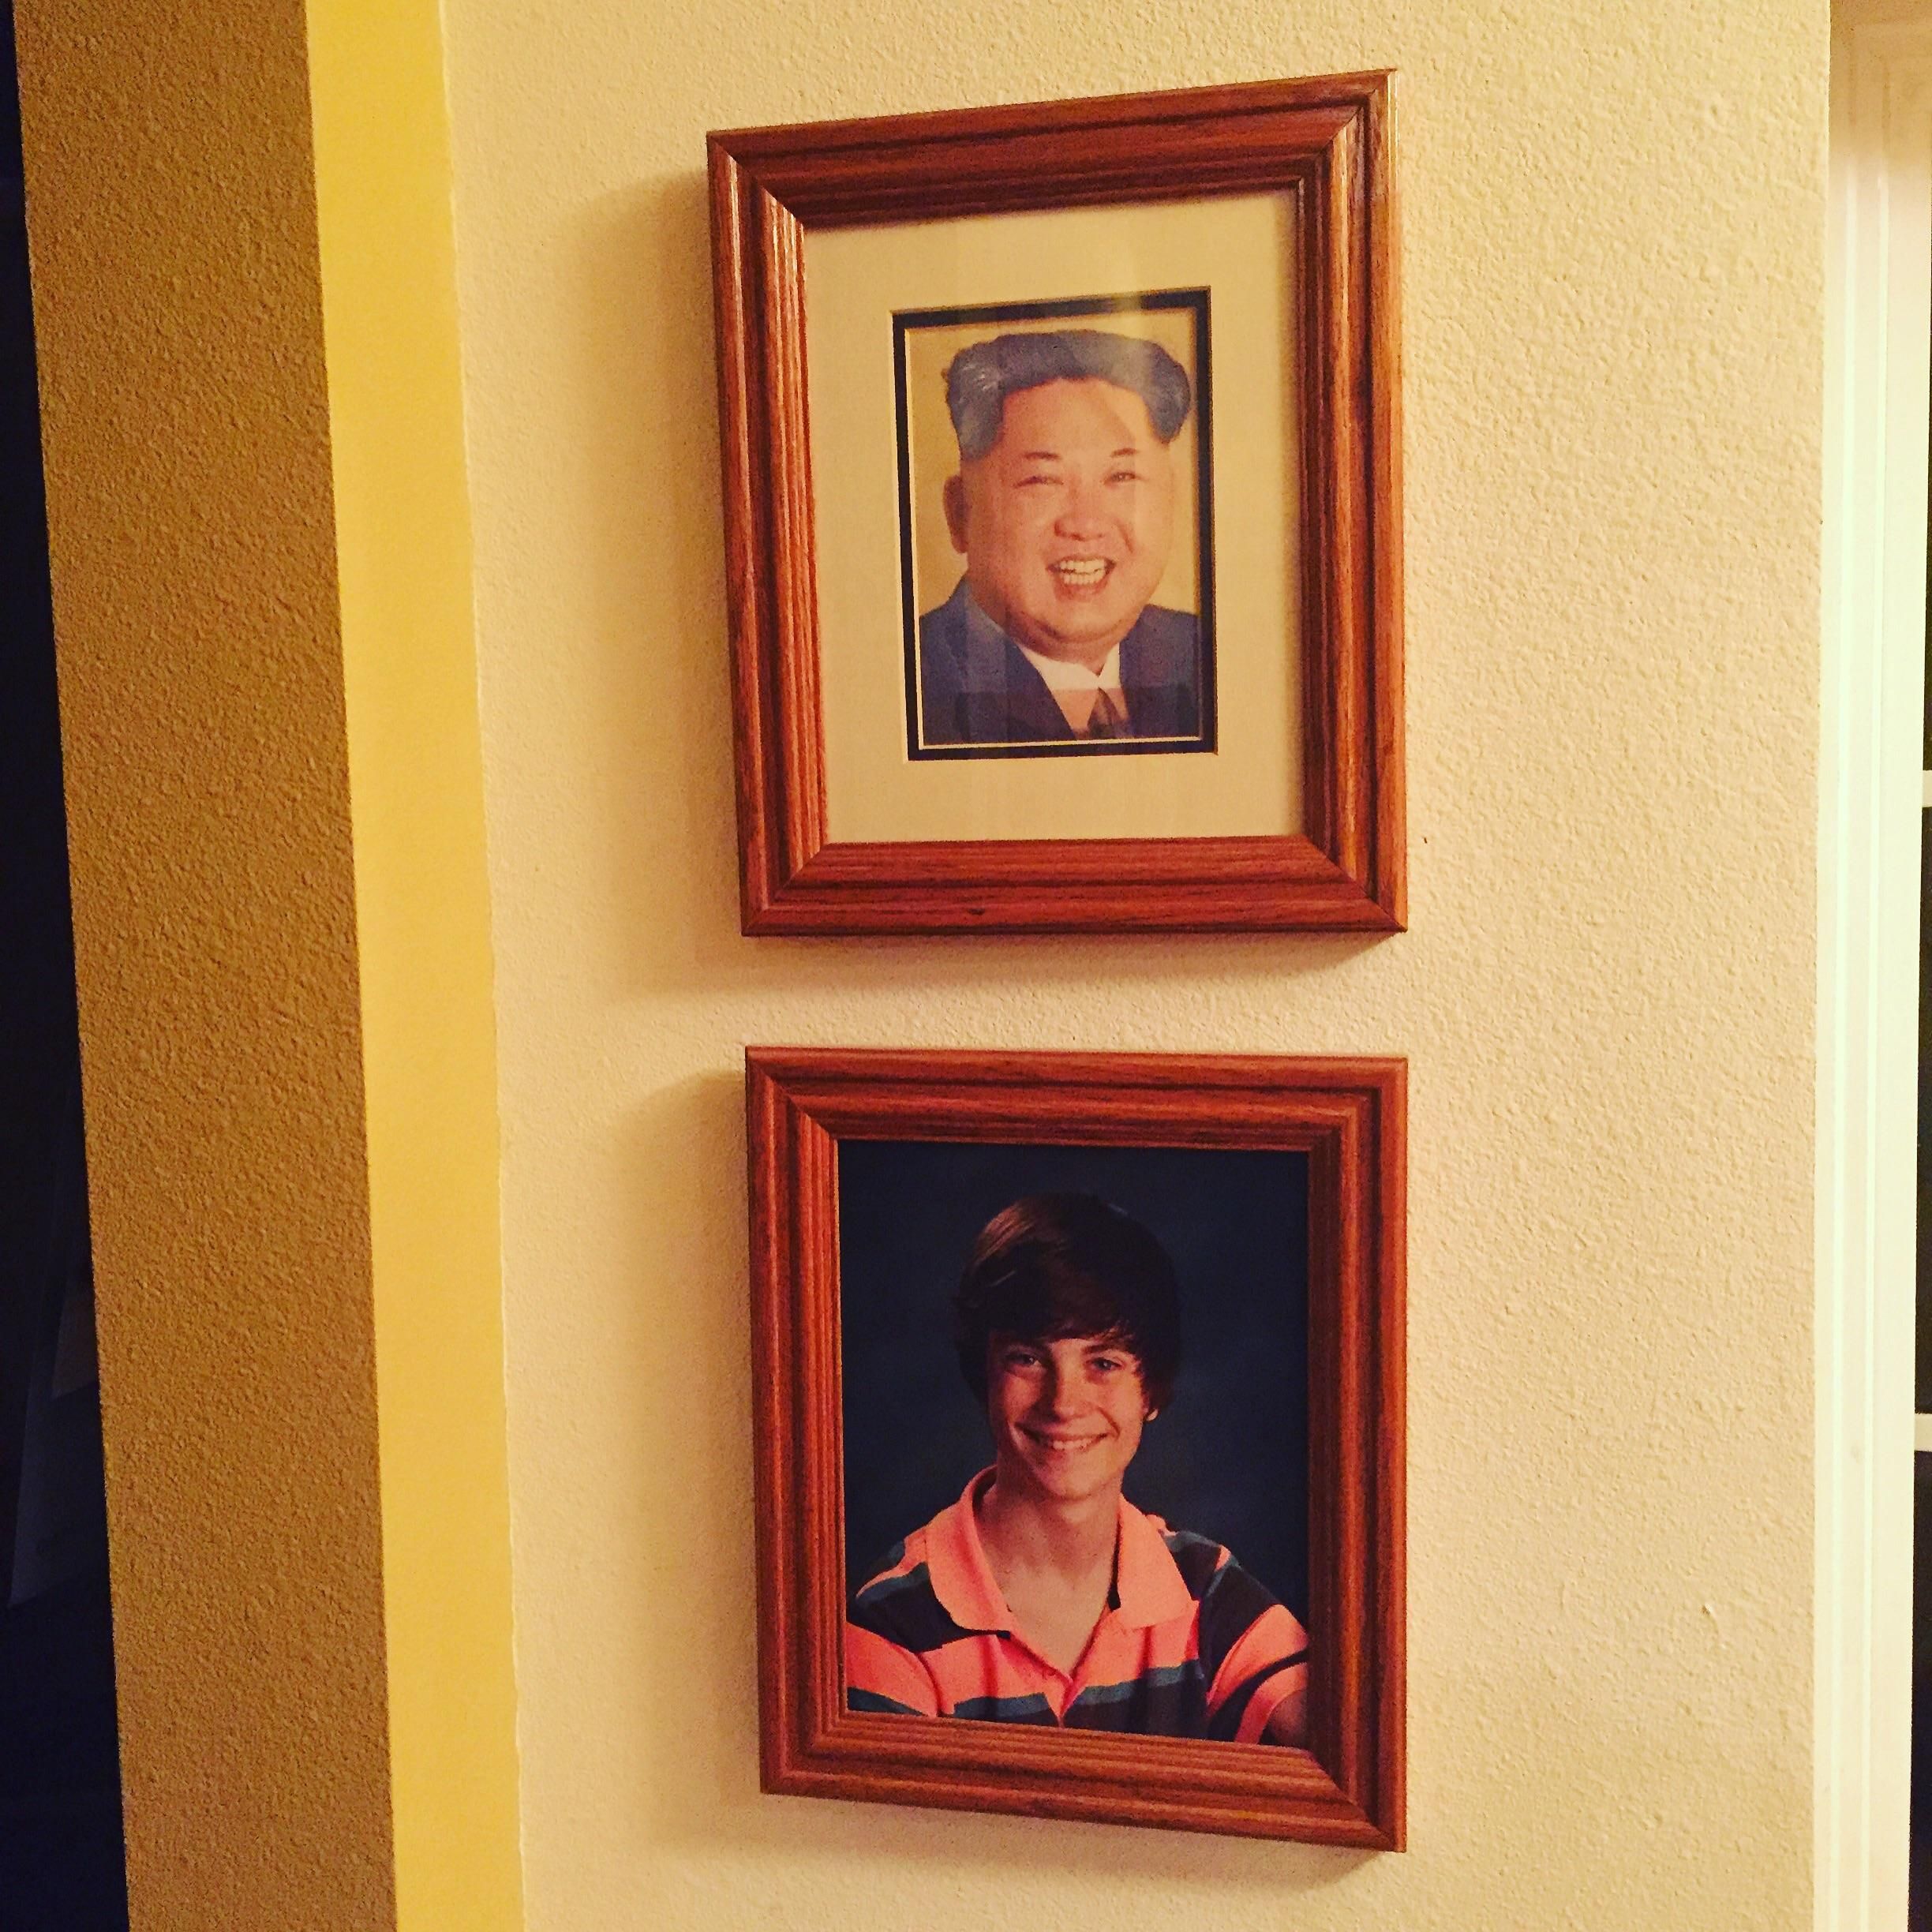 Replaced my little sisters graduation photo with one of the supreme leader 3 weeks ago. Dad still hasn’t noticed.